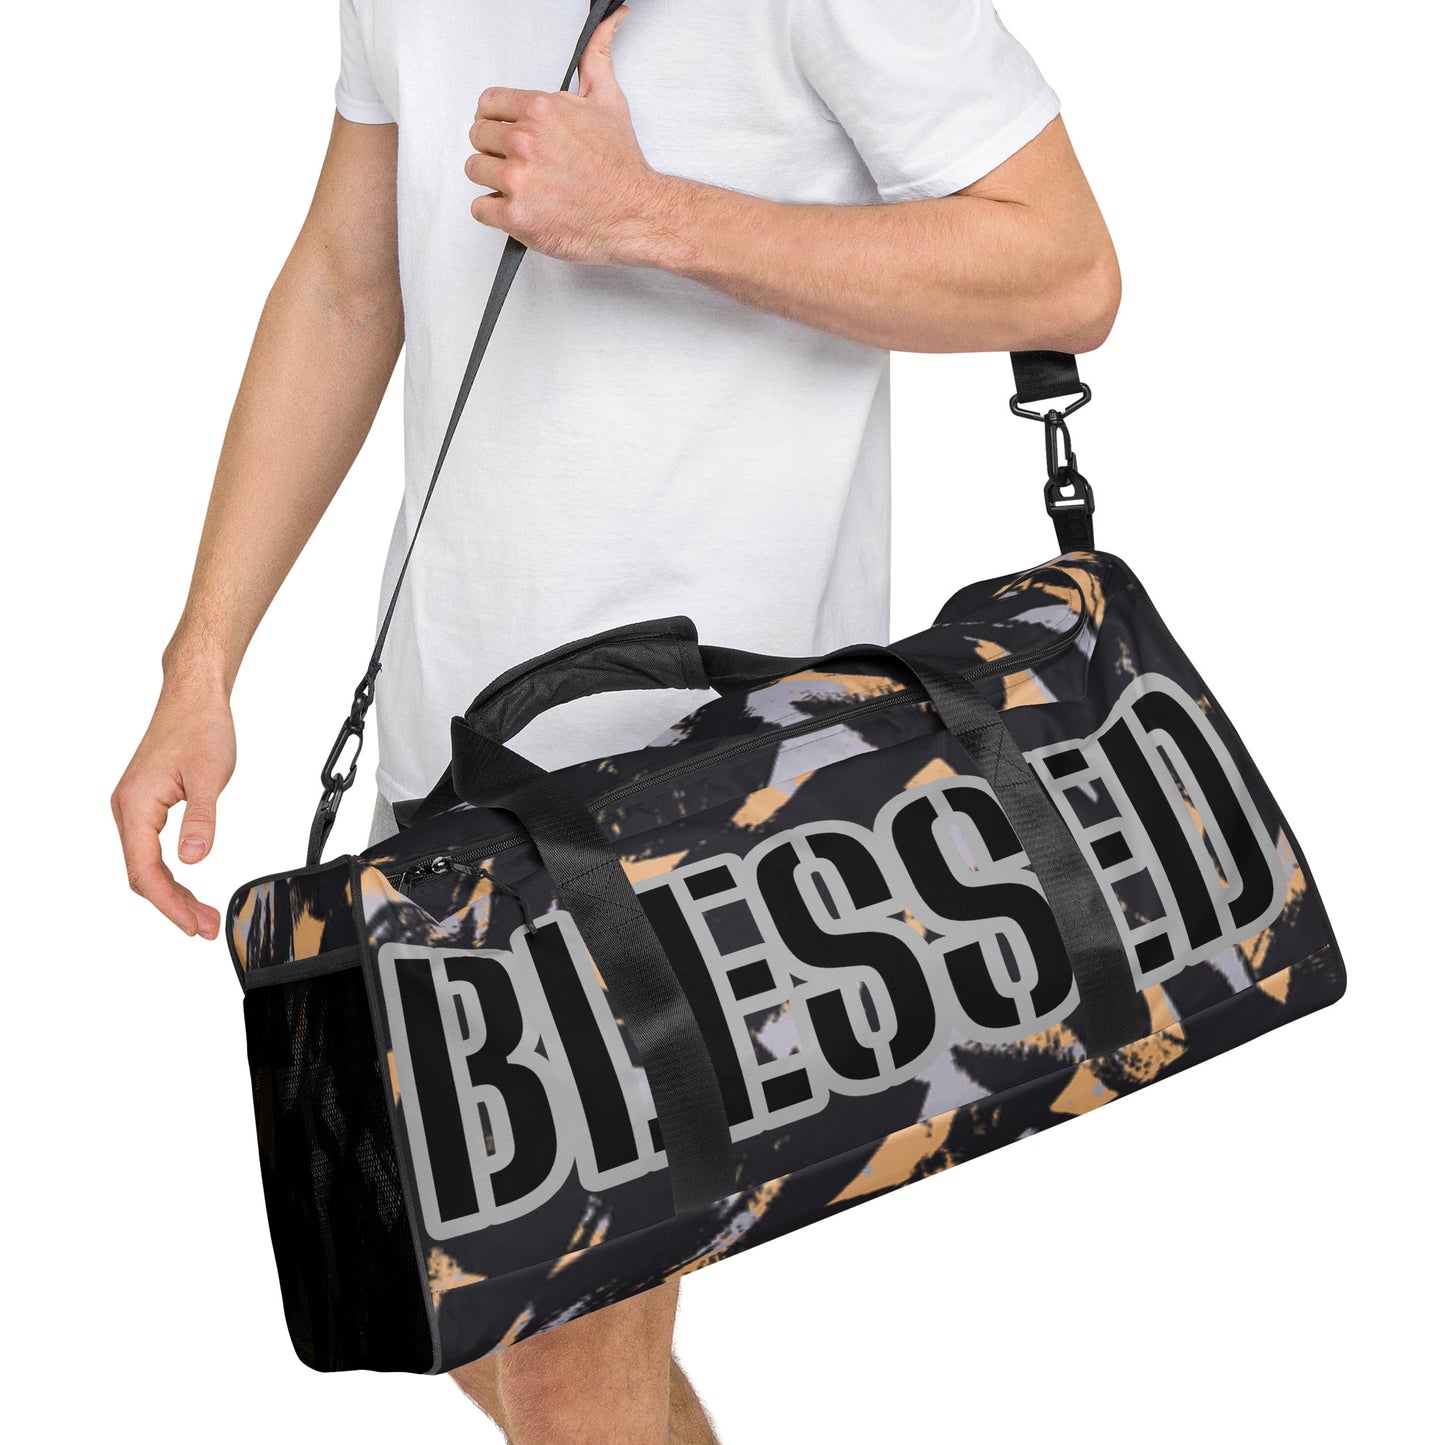 Blessed- Duffle bag